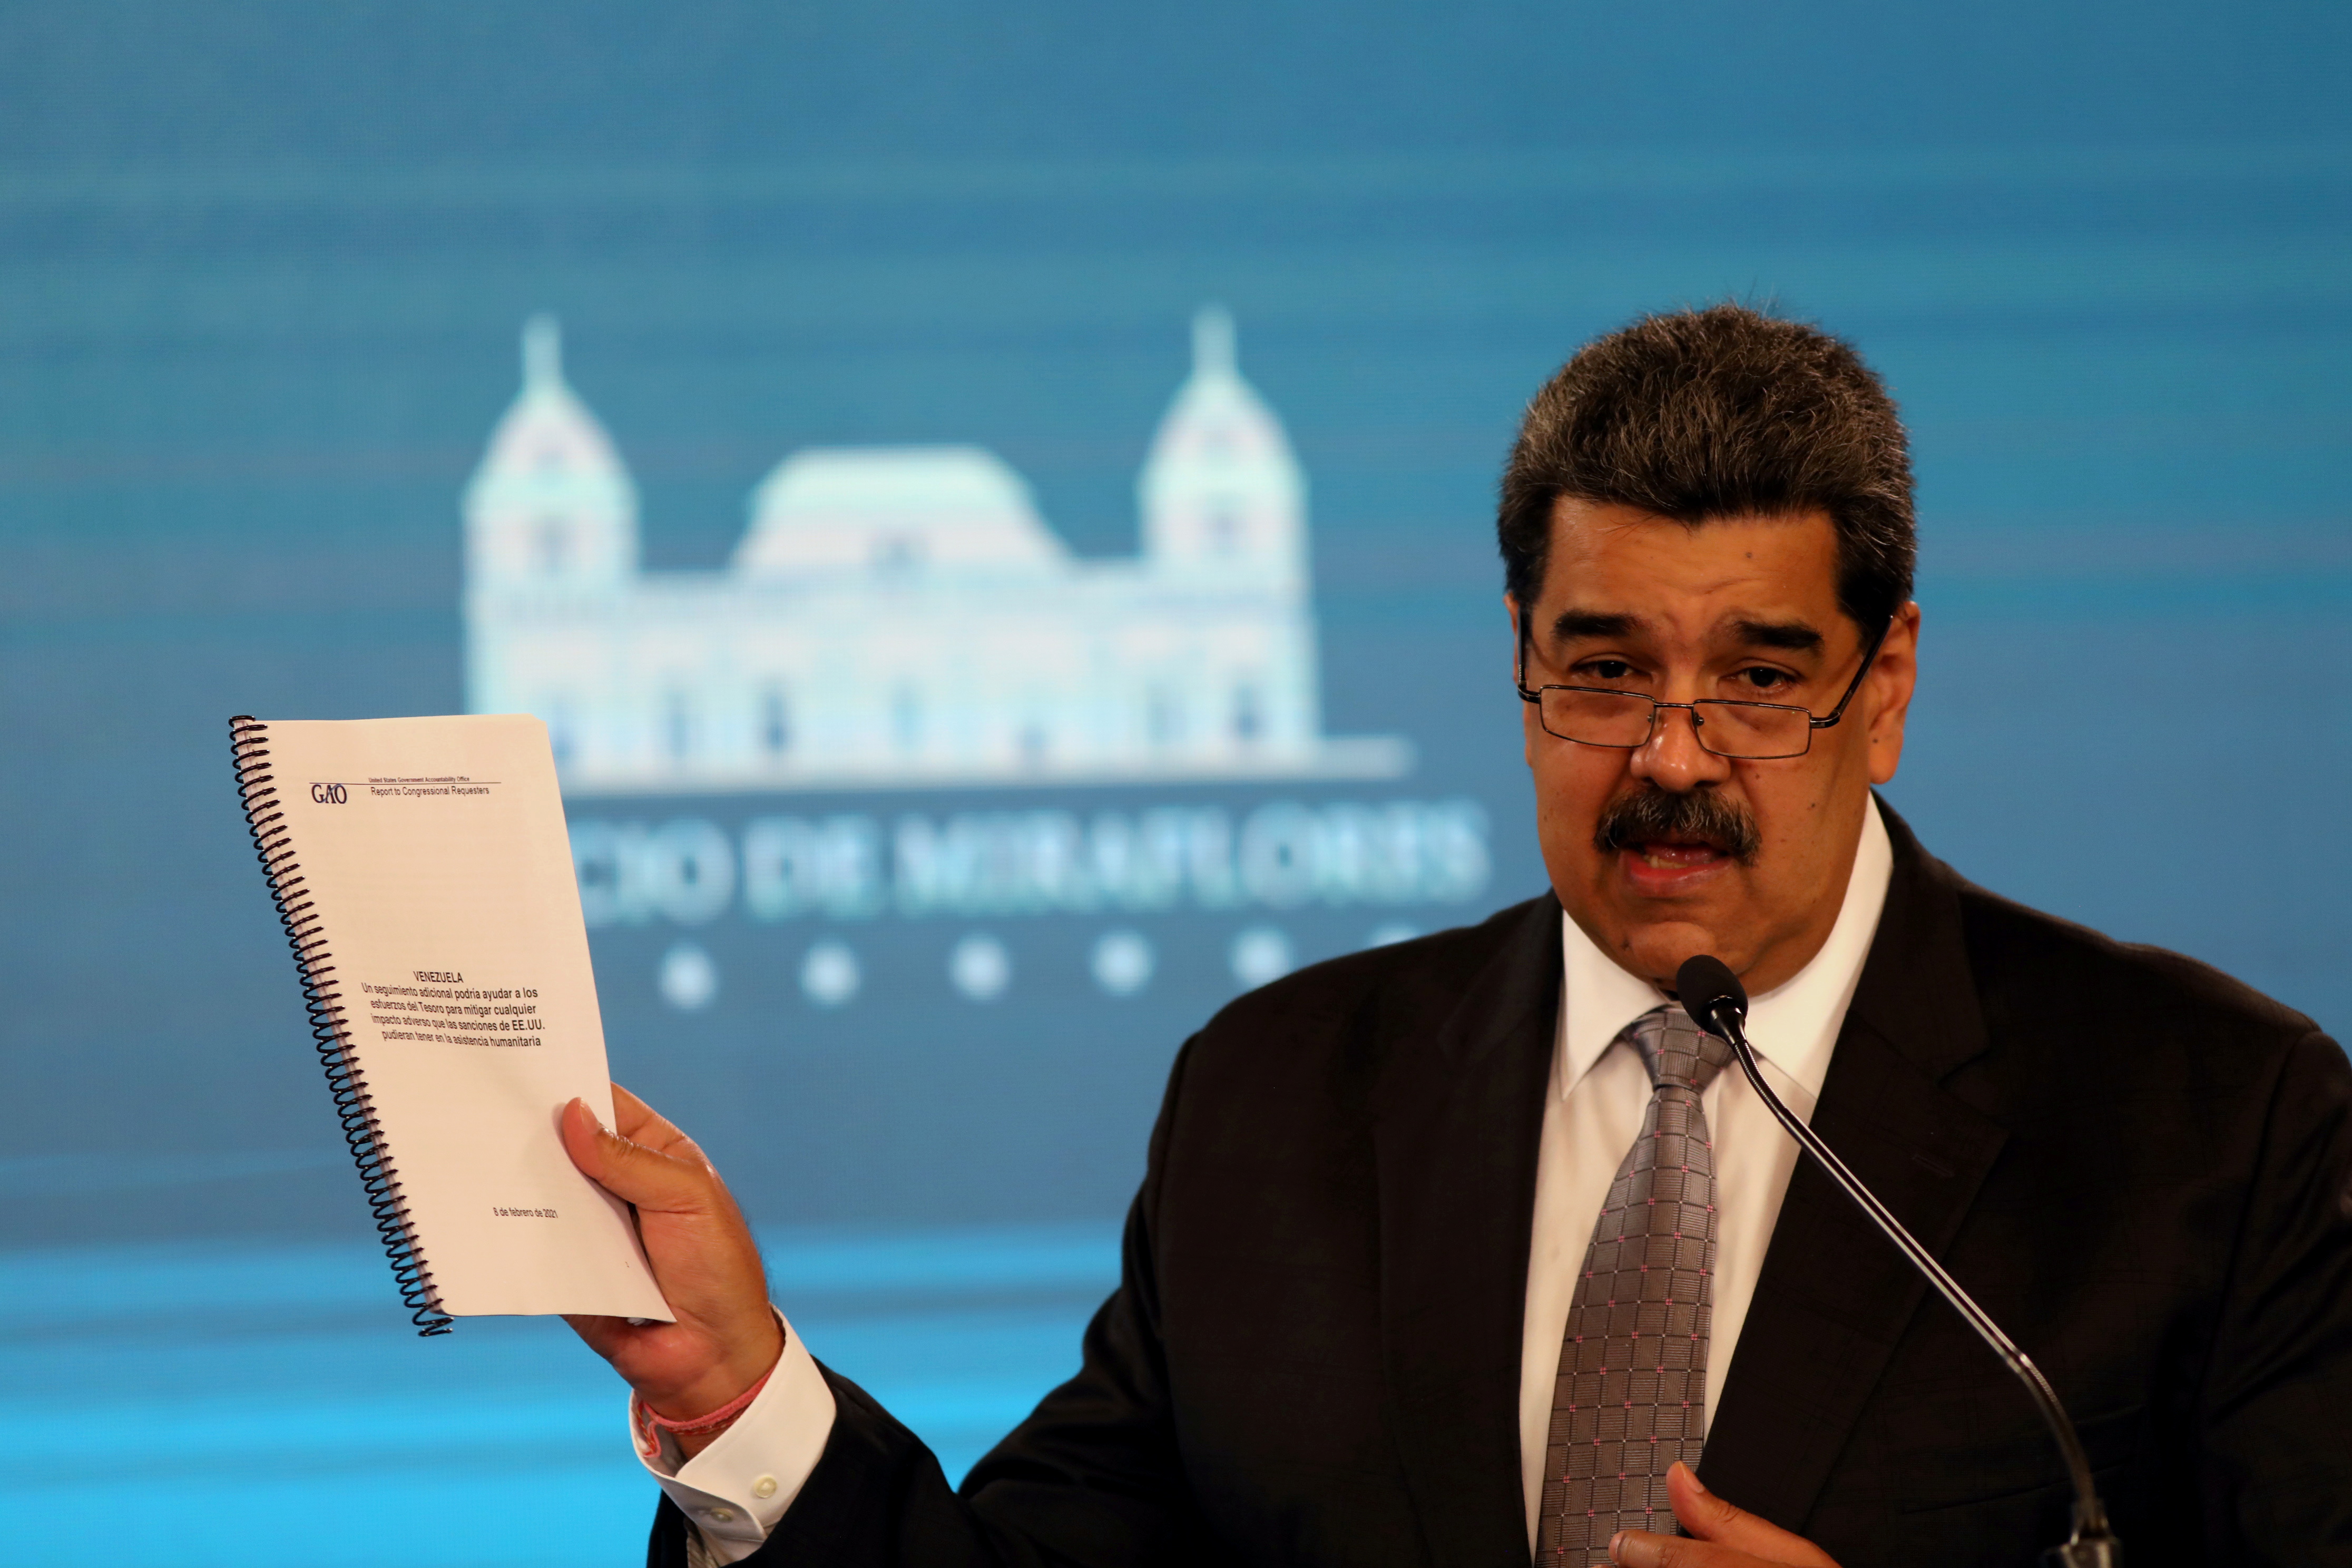 Venezuela's President Maduro shows a document from the government administration office during a news conference in Caracas